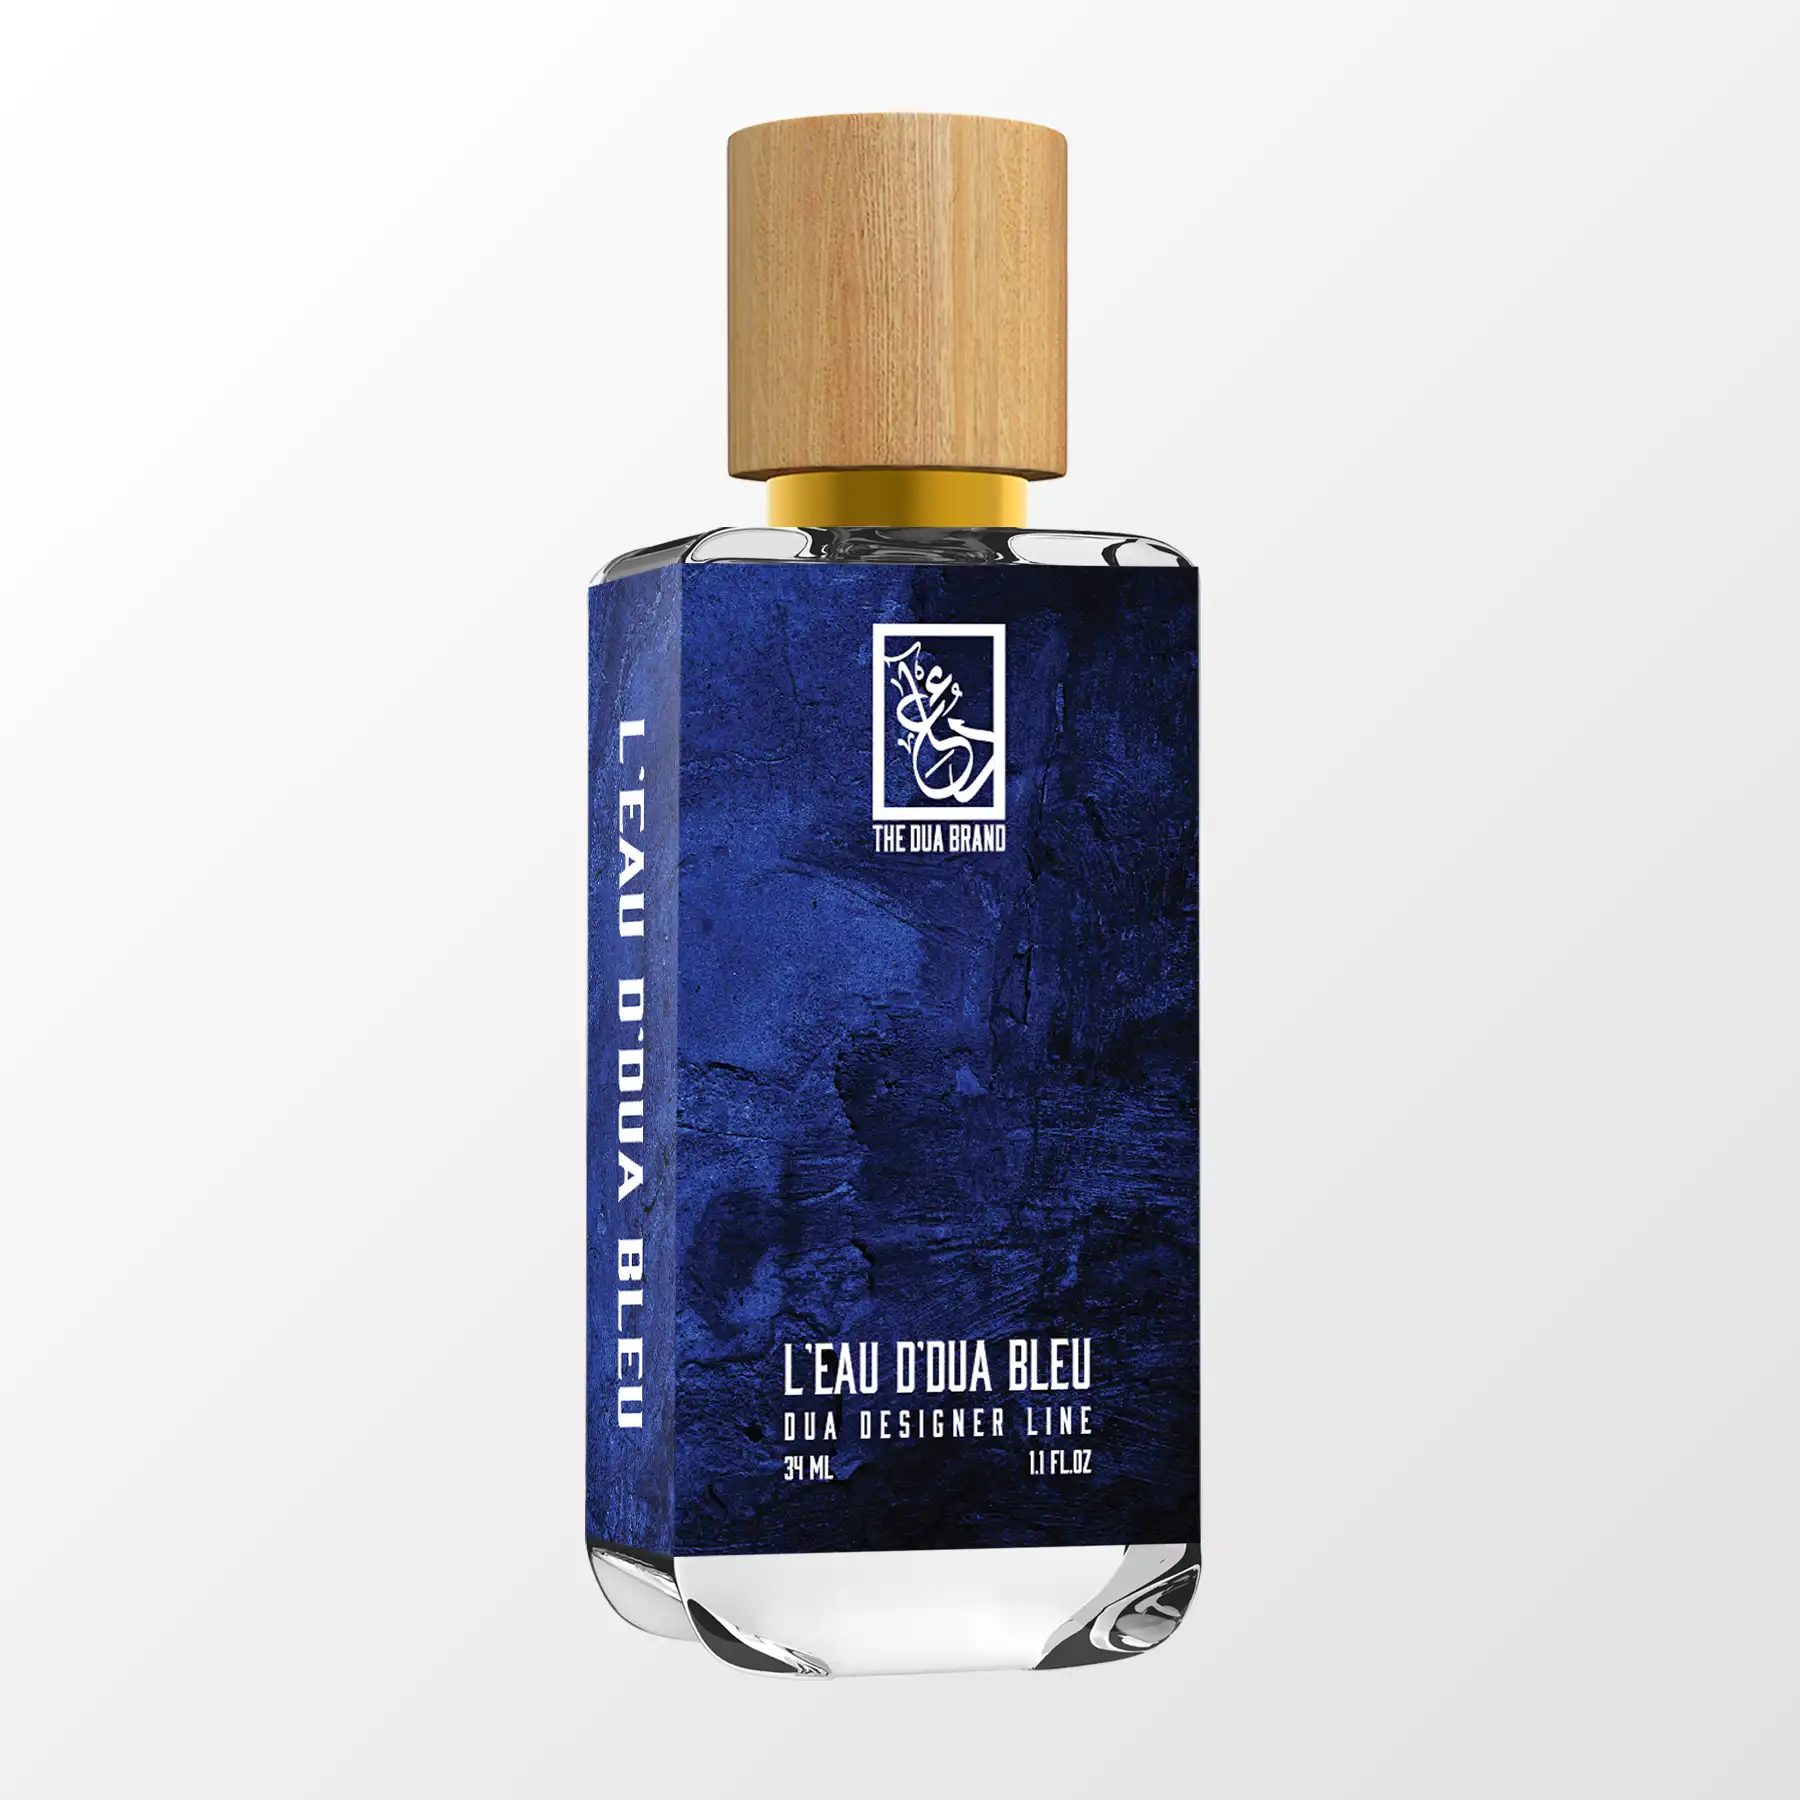 L'eau Bleue D'Issey Pour Homme by Issey Miyake Fragrance Review